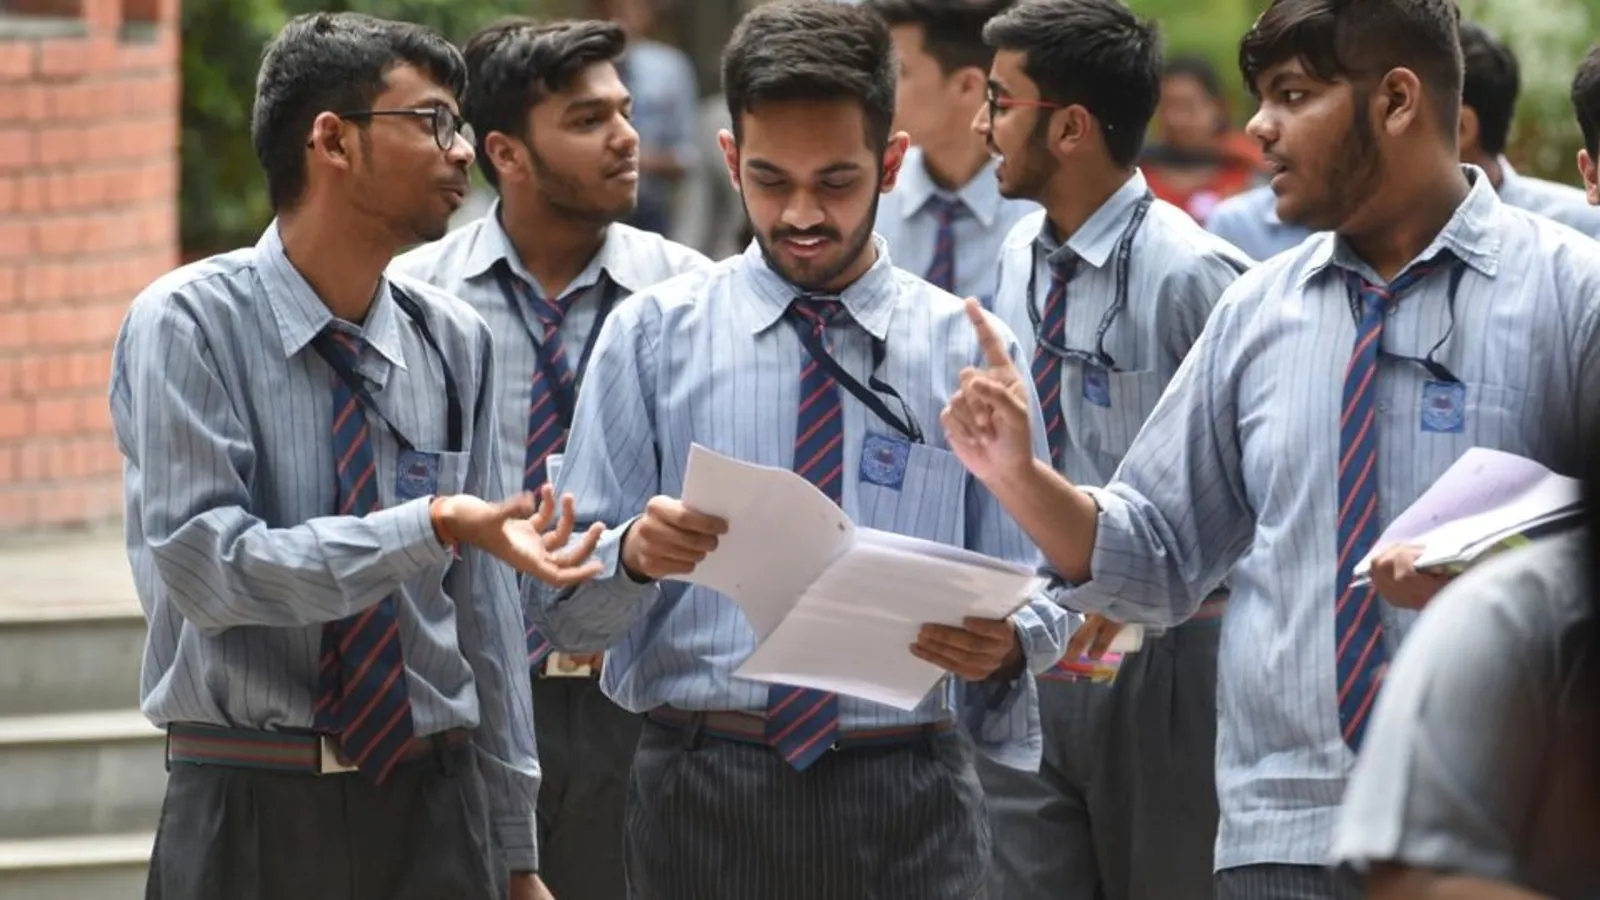 Dropout rate at secondary level higher than national average in seven states: Centre